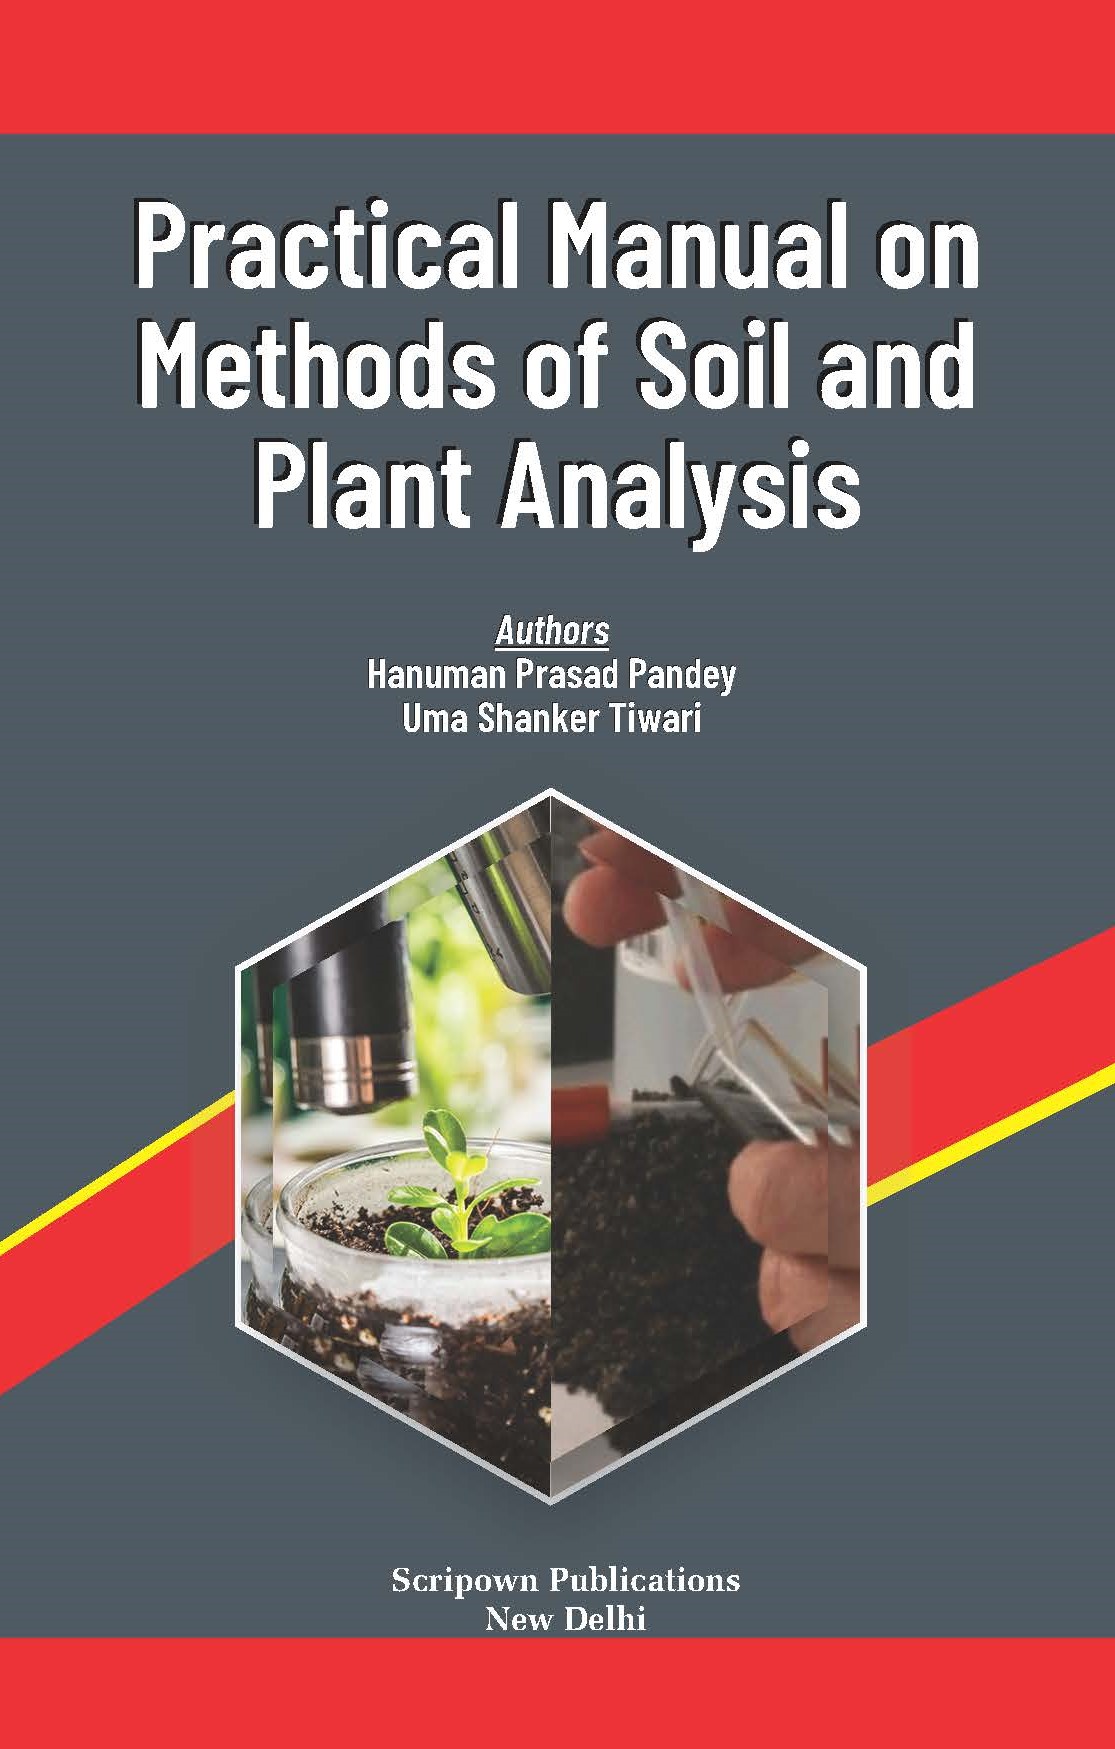 Practical Manual on Methods of Soil and Plant Analysis